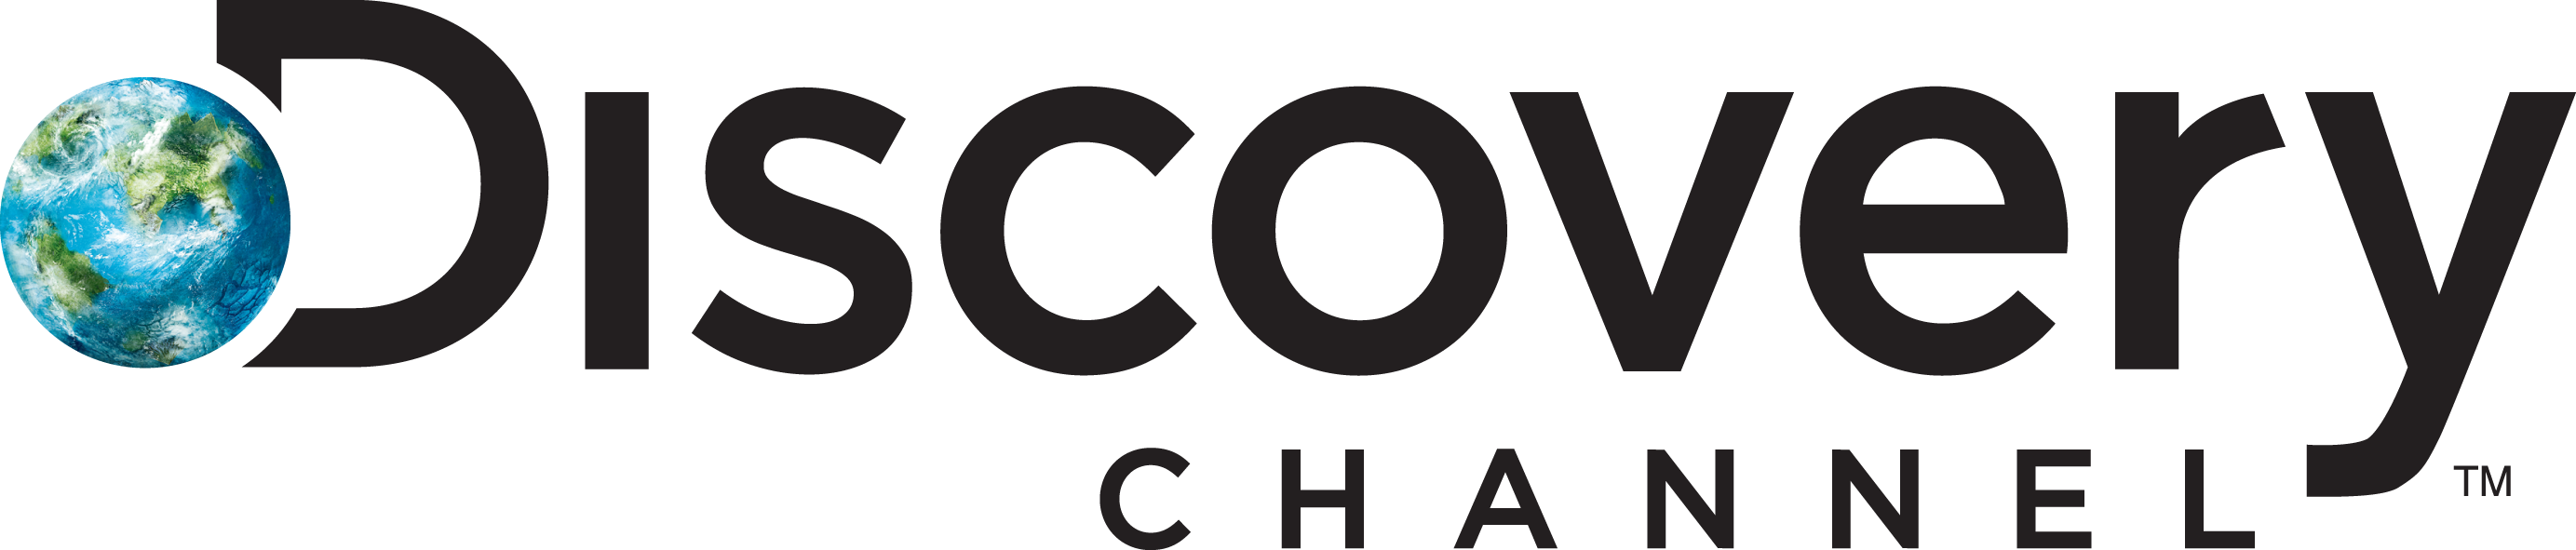 discovery-channel-logo